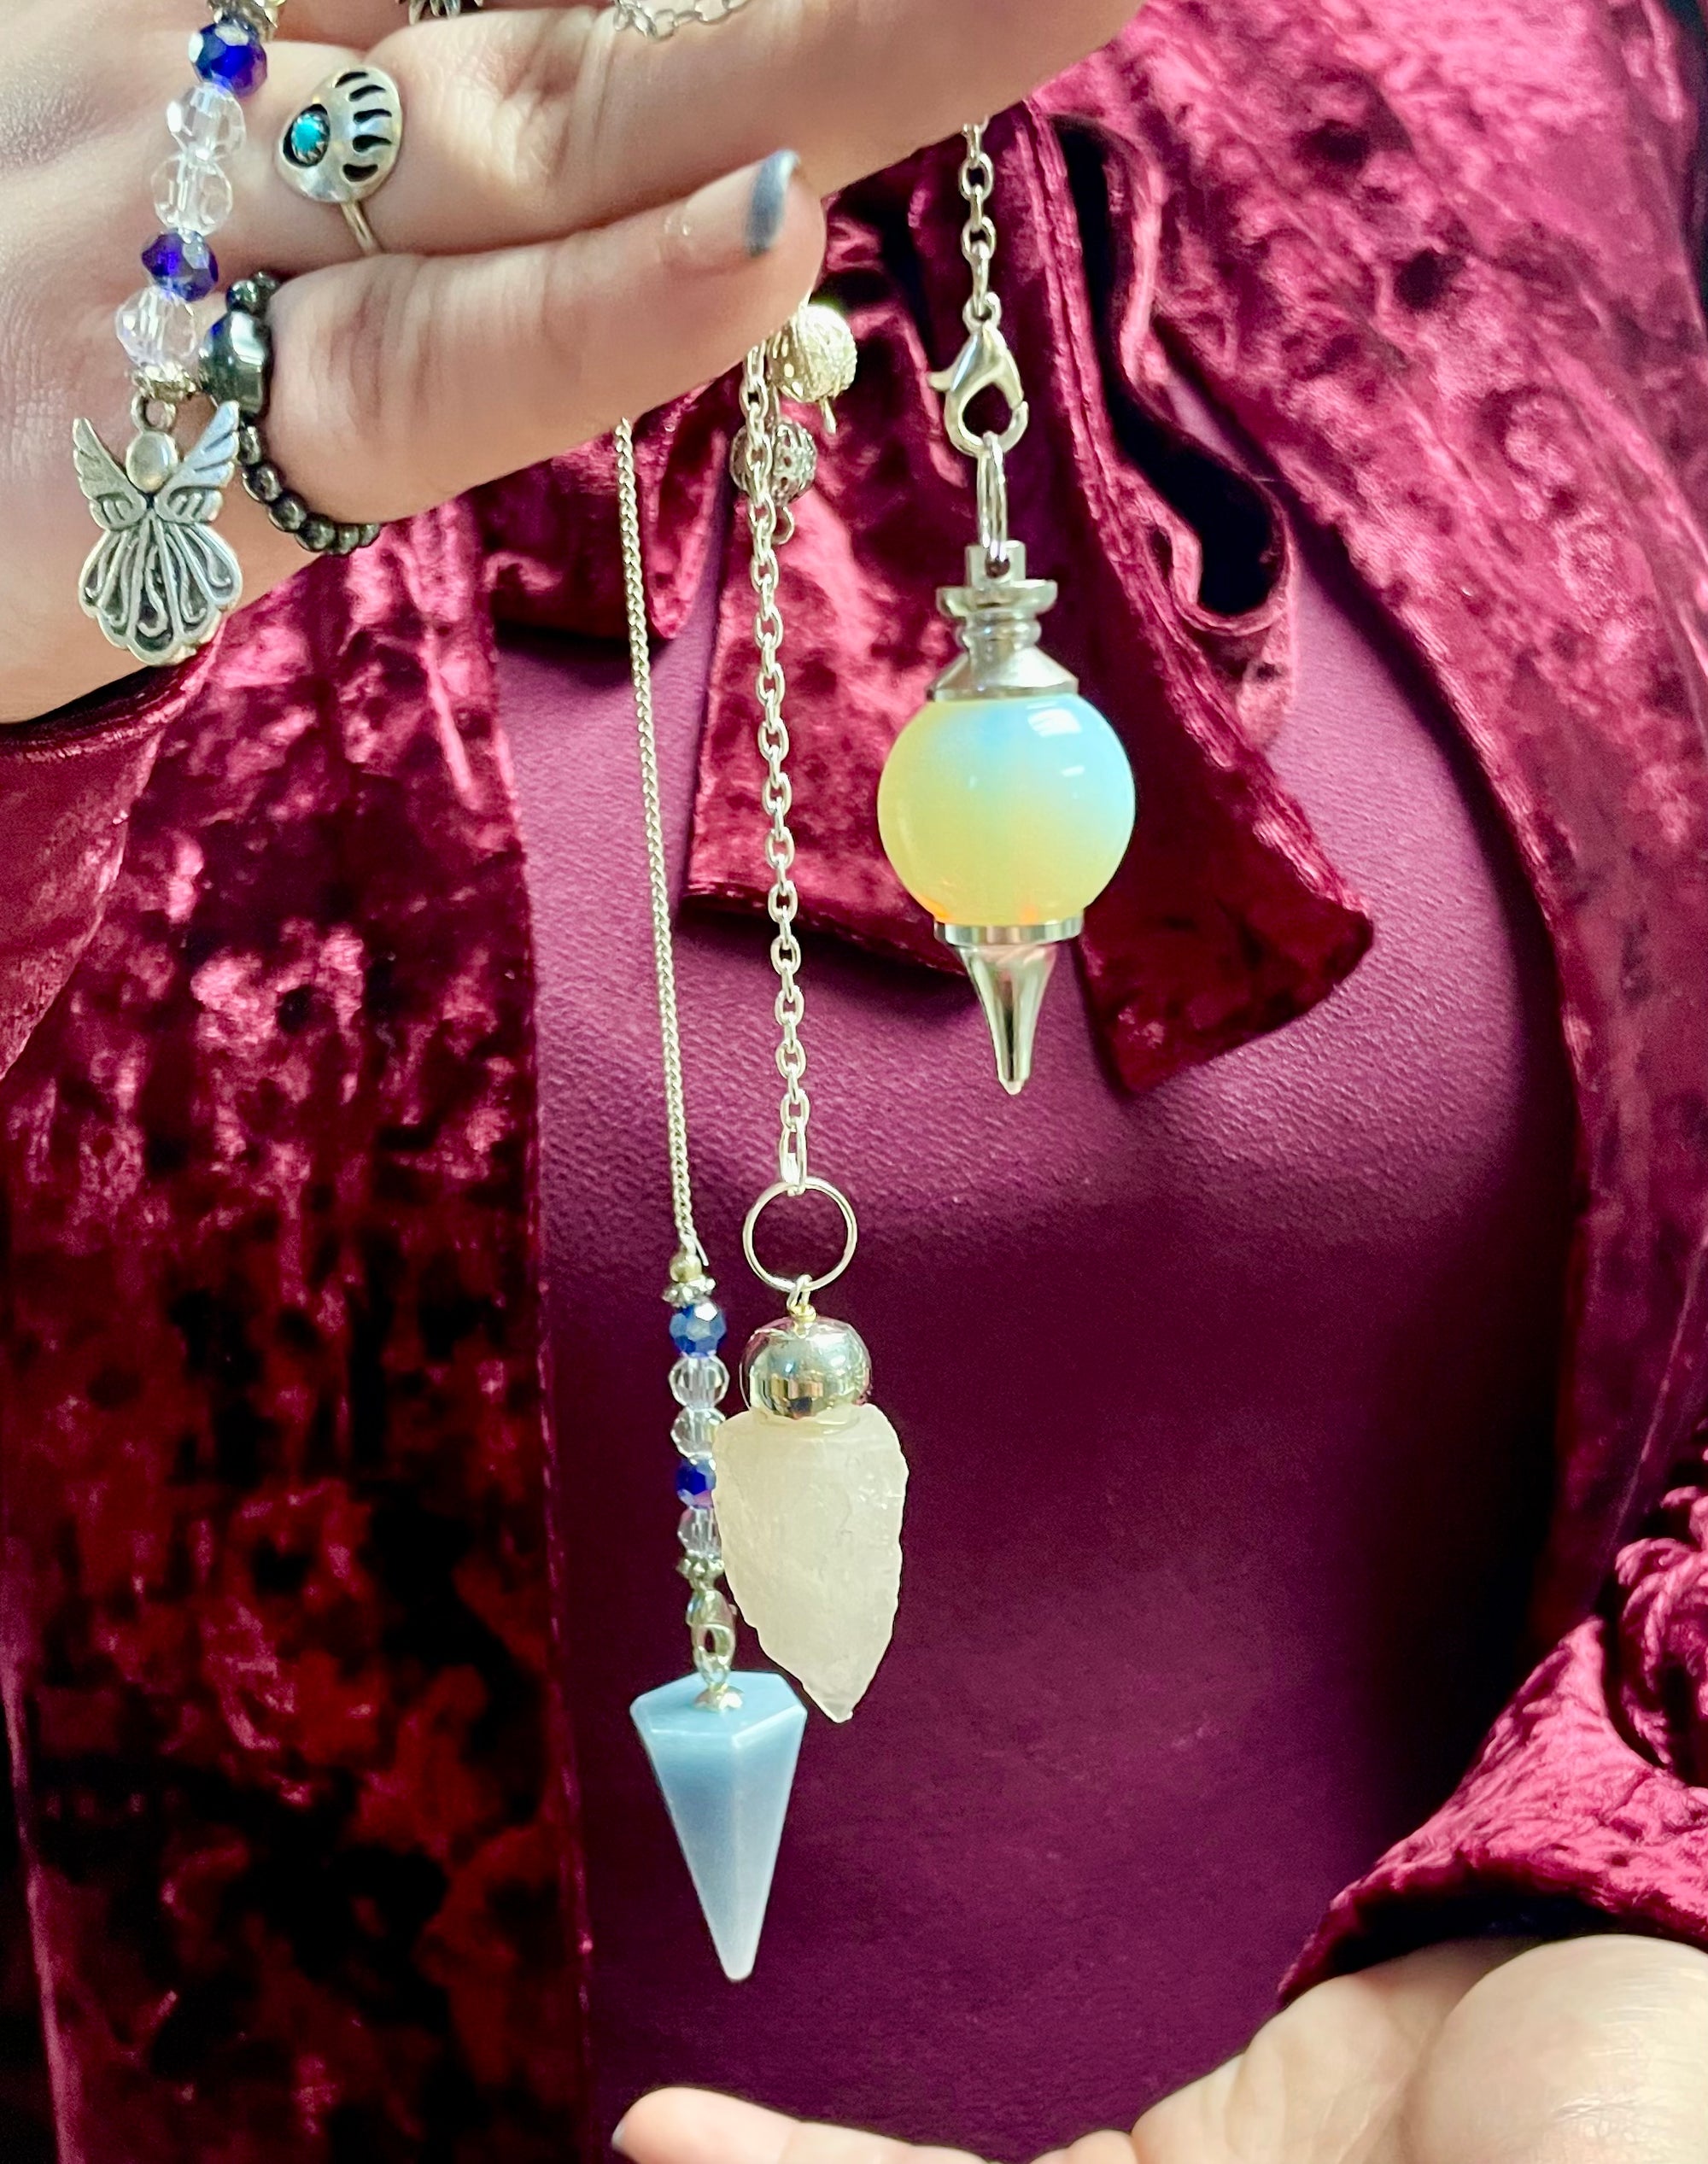 How to Use a Gemstone Pendulum for Divine Guidance and Healing